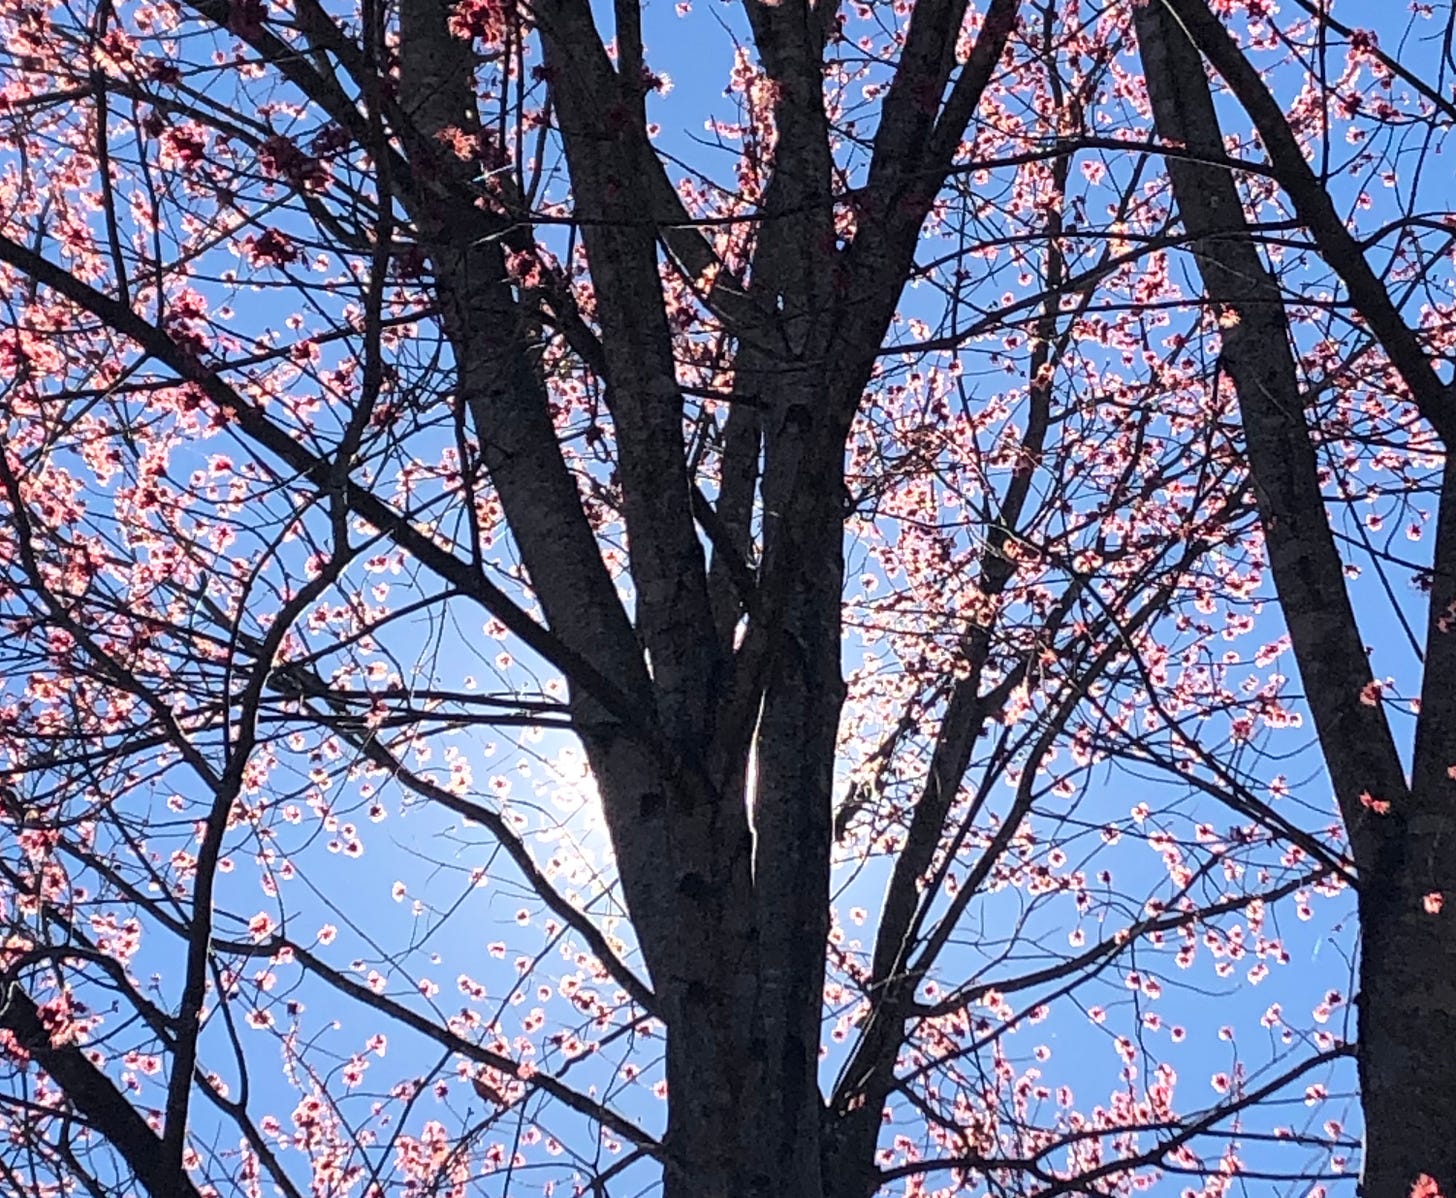 looking up at a tree trunk surrounded by a halo of red maple blossoms, backlit by a setting sun